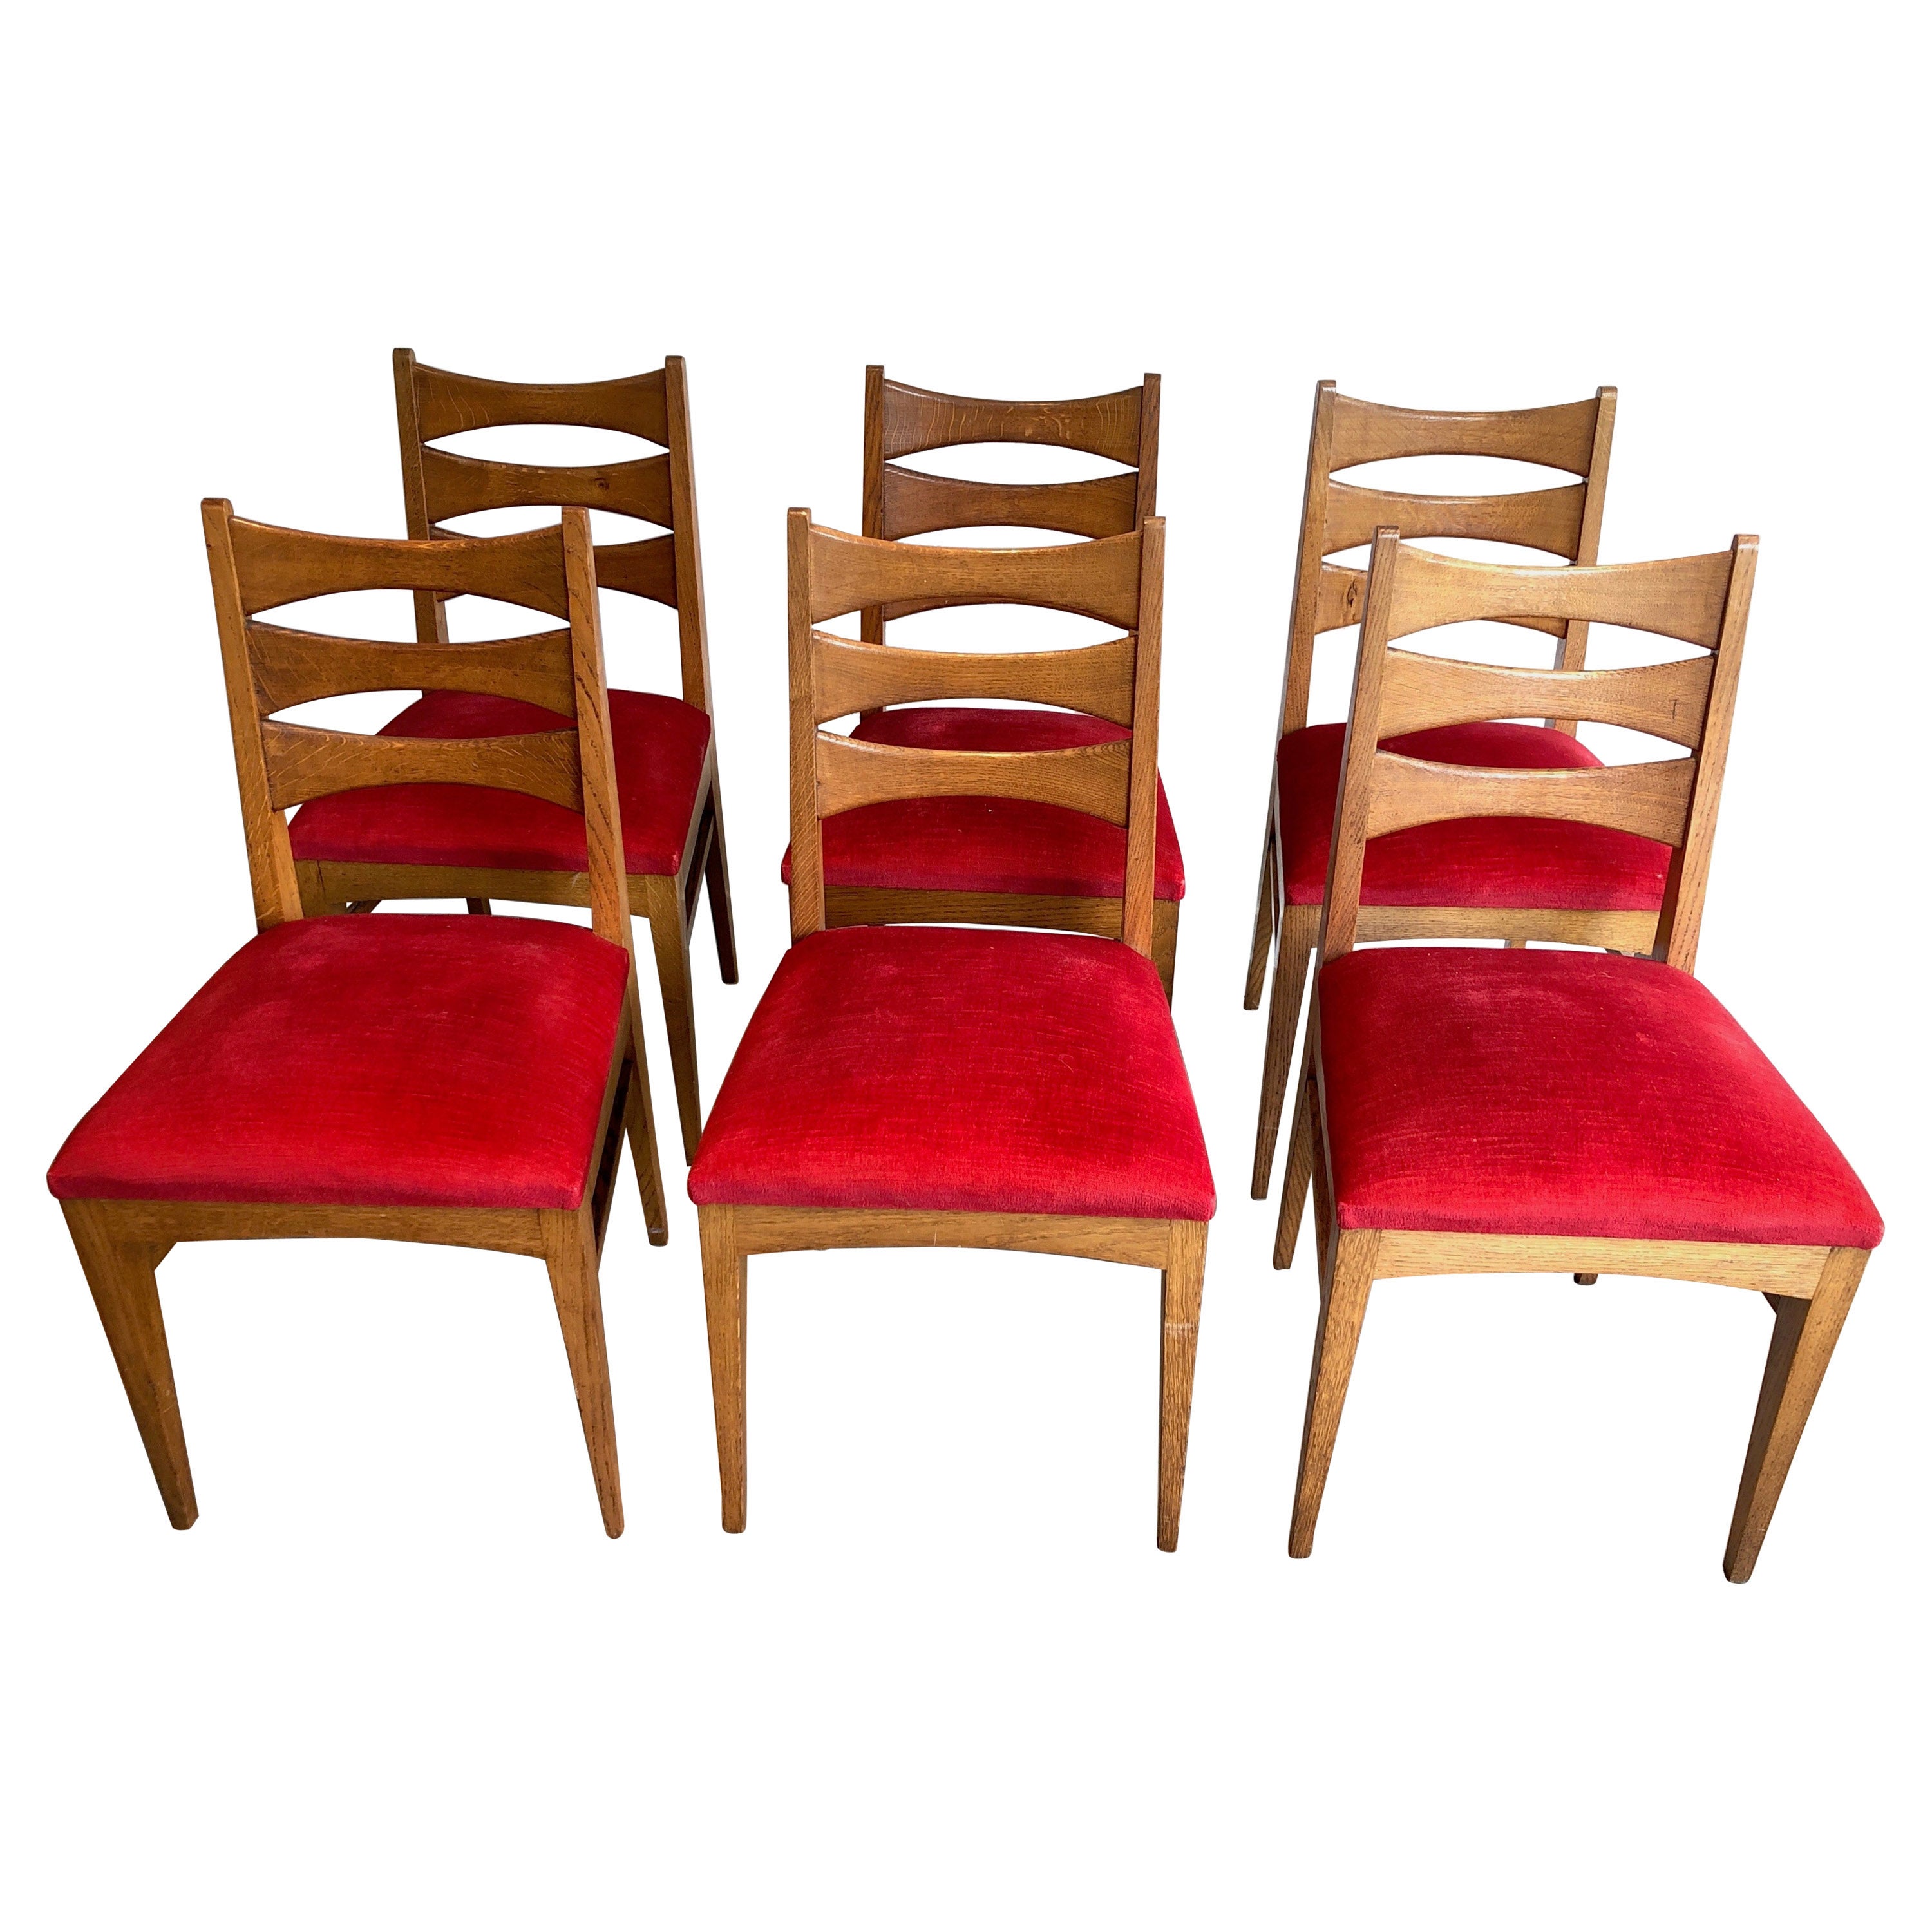 Set of 6 Oak and Red Velvet Chairs. French Work, Circa 1950 For Sale